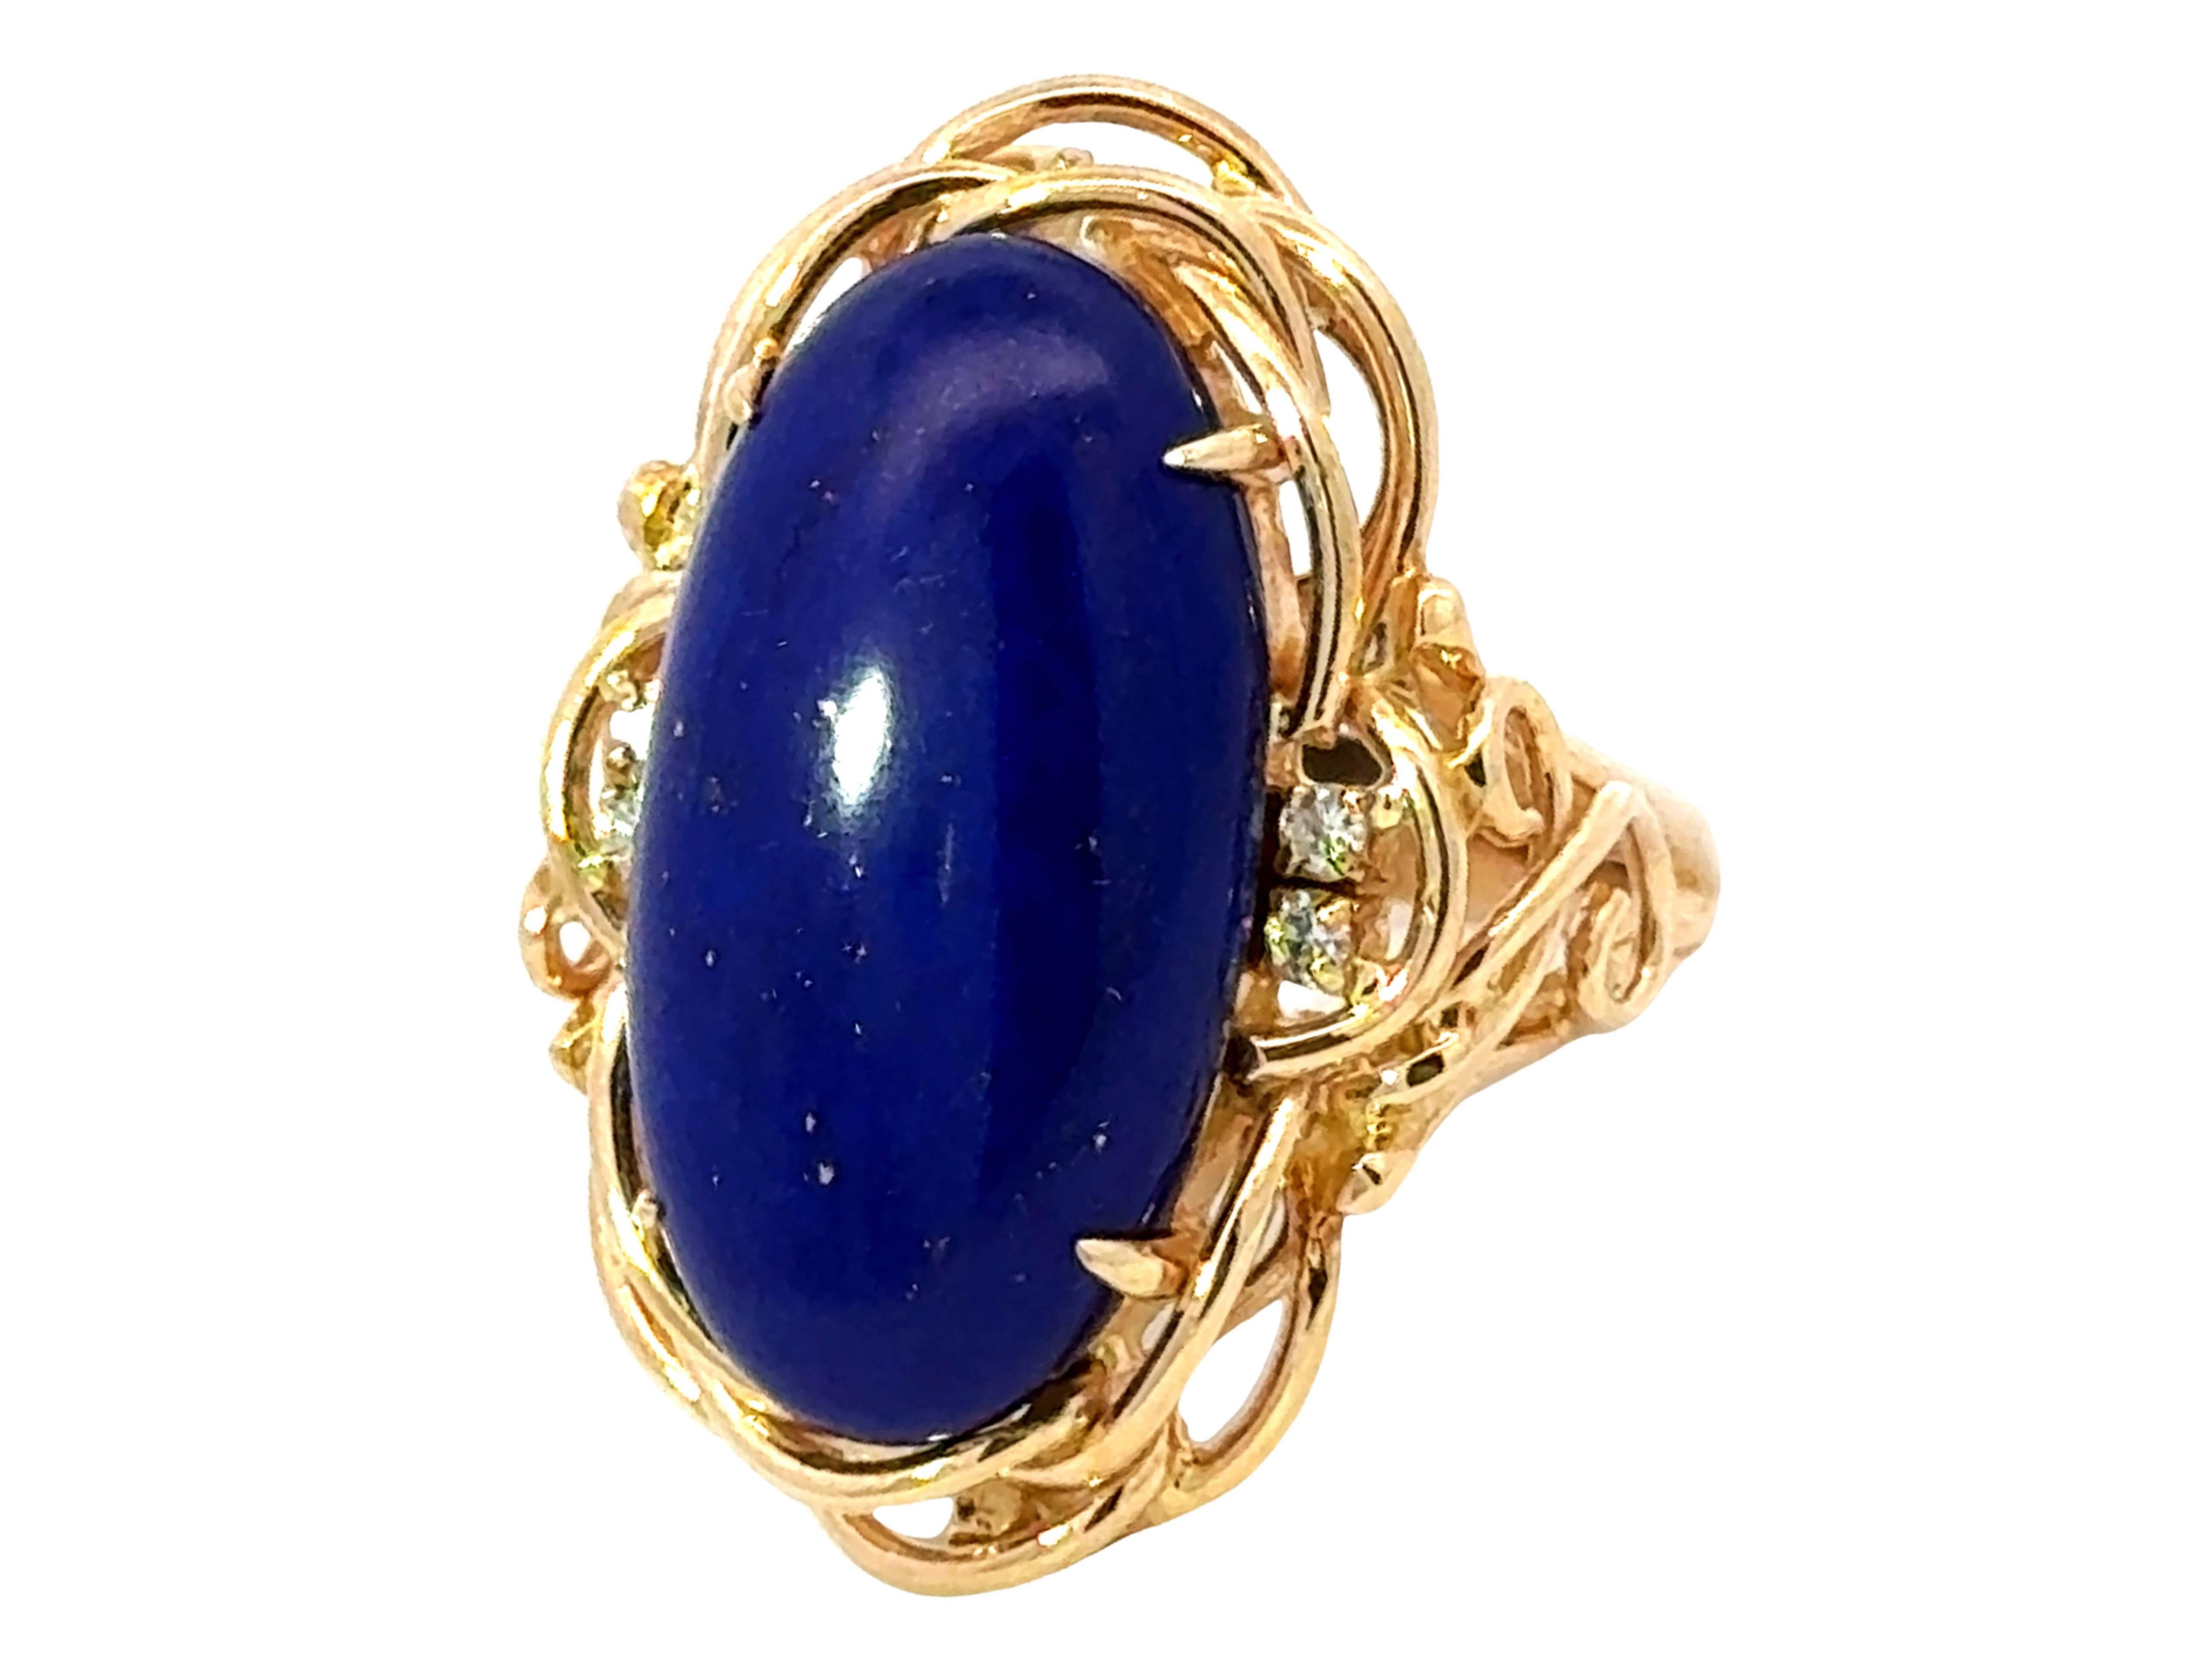 Oval Cut Large Lapis Lazuli Diamond Cocktail Ring 14k Yellow Gold For Sale